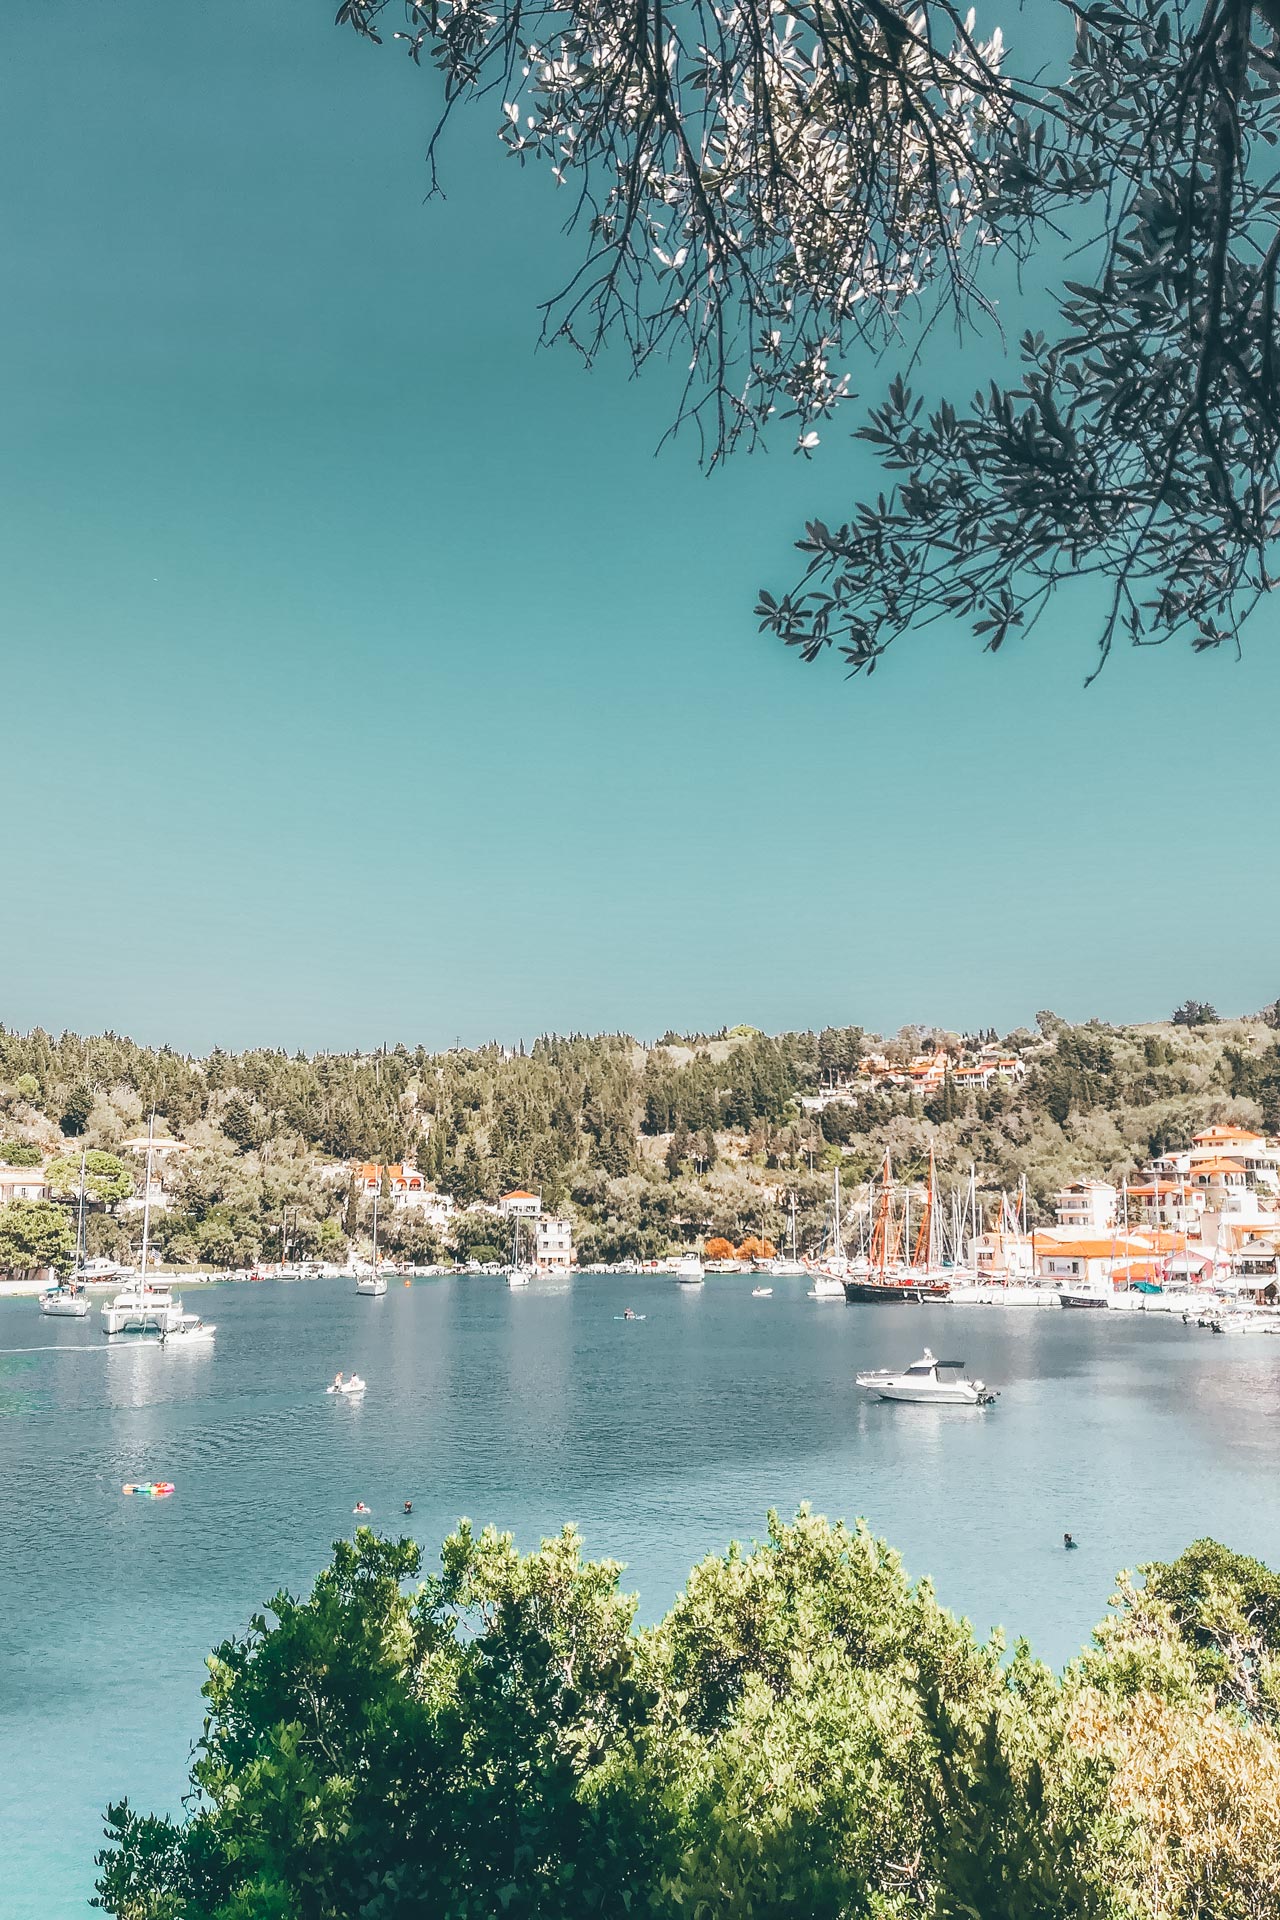 The bay of Lakka village is almost sheltered from the open sea and it is excellent for swimming, water sports and for mooring boats